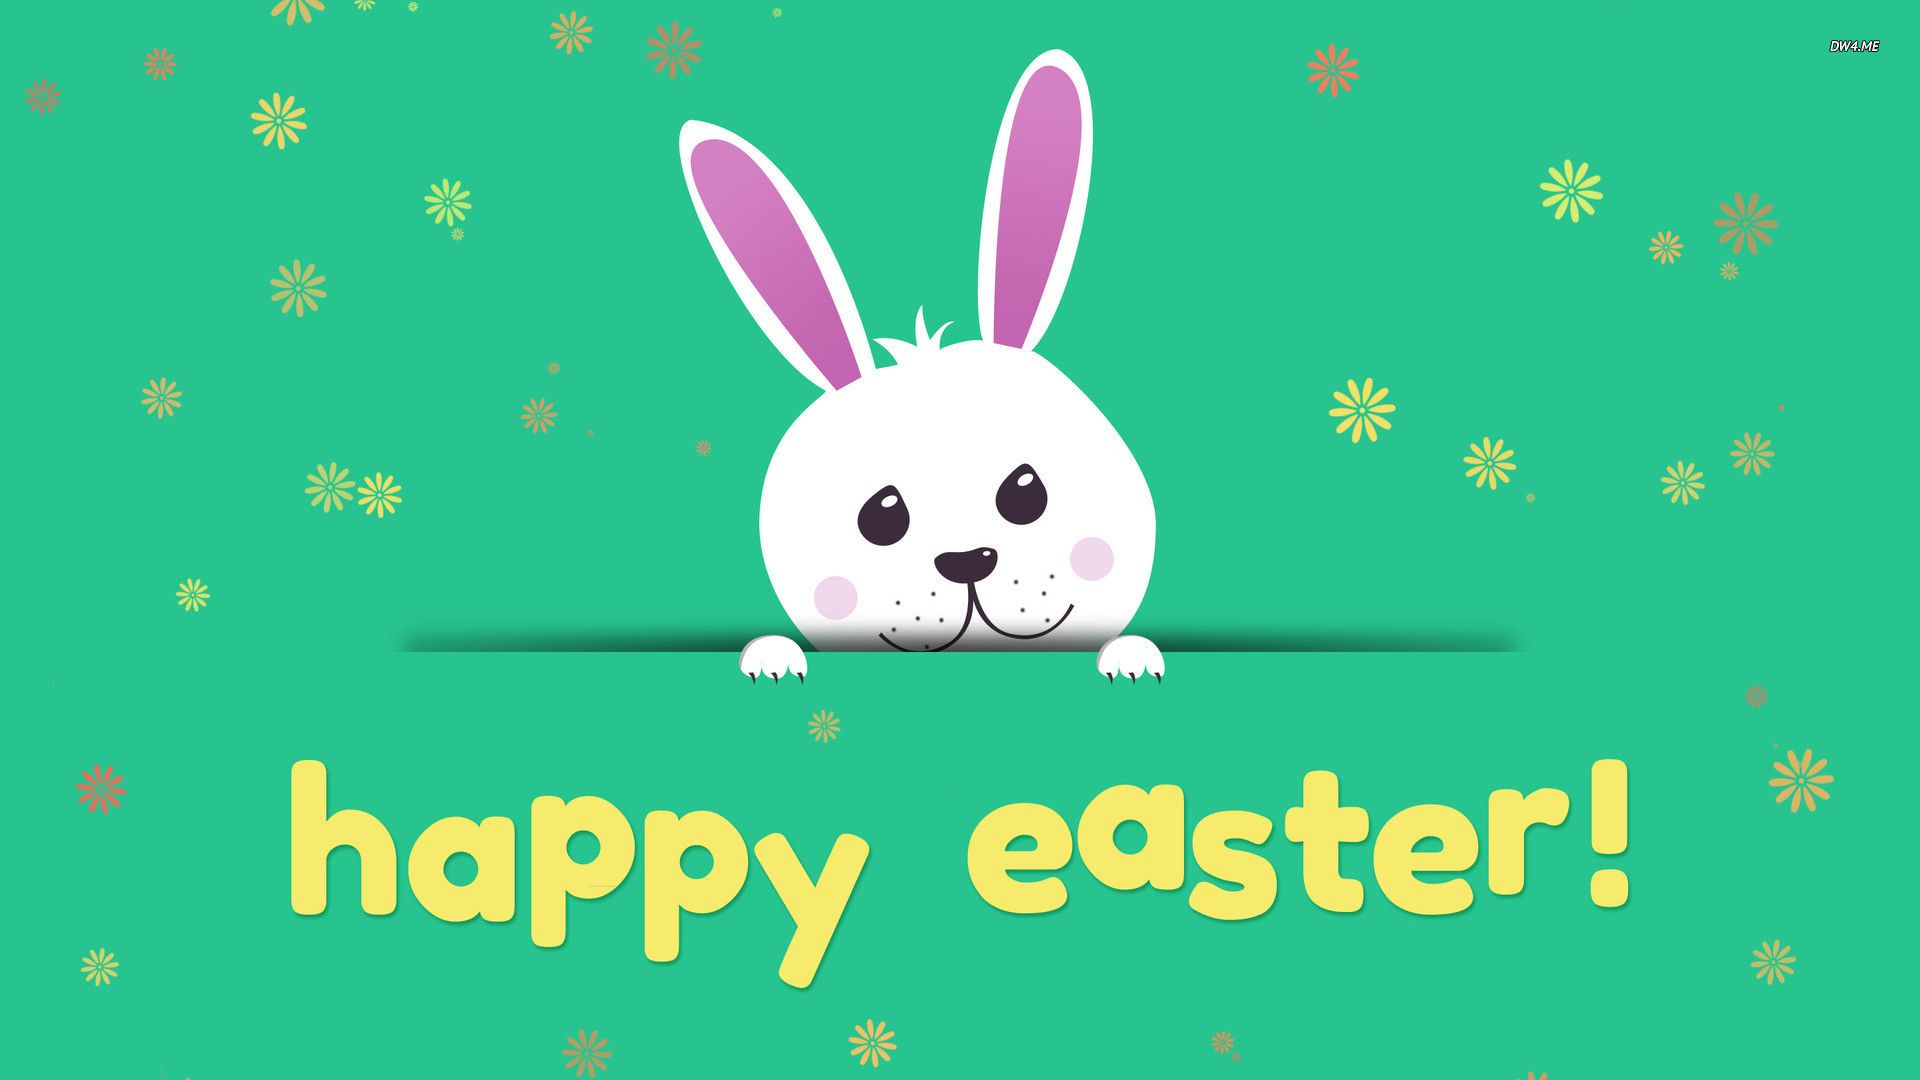 Cute Easter Laptop Wallpaper Free Cute Easter Laptop Background